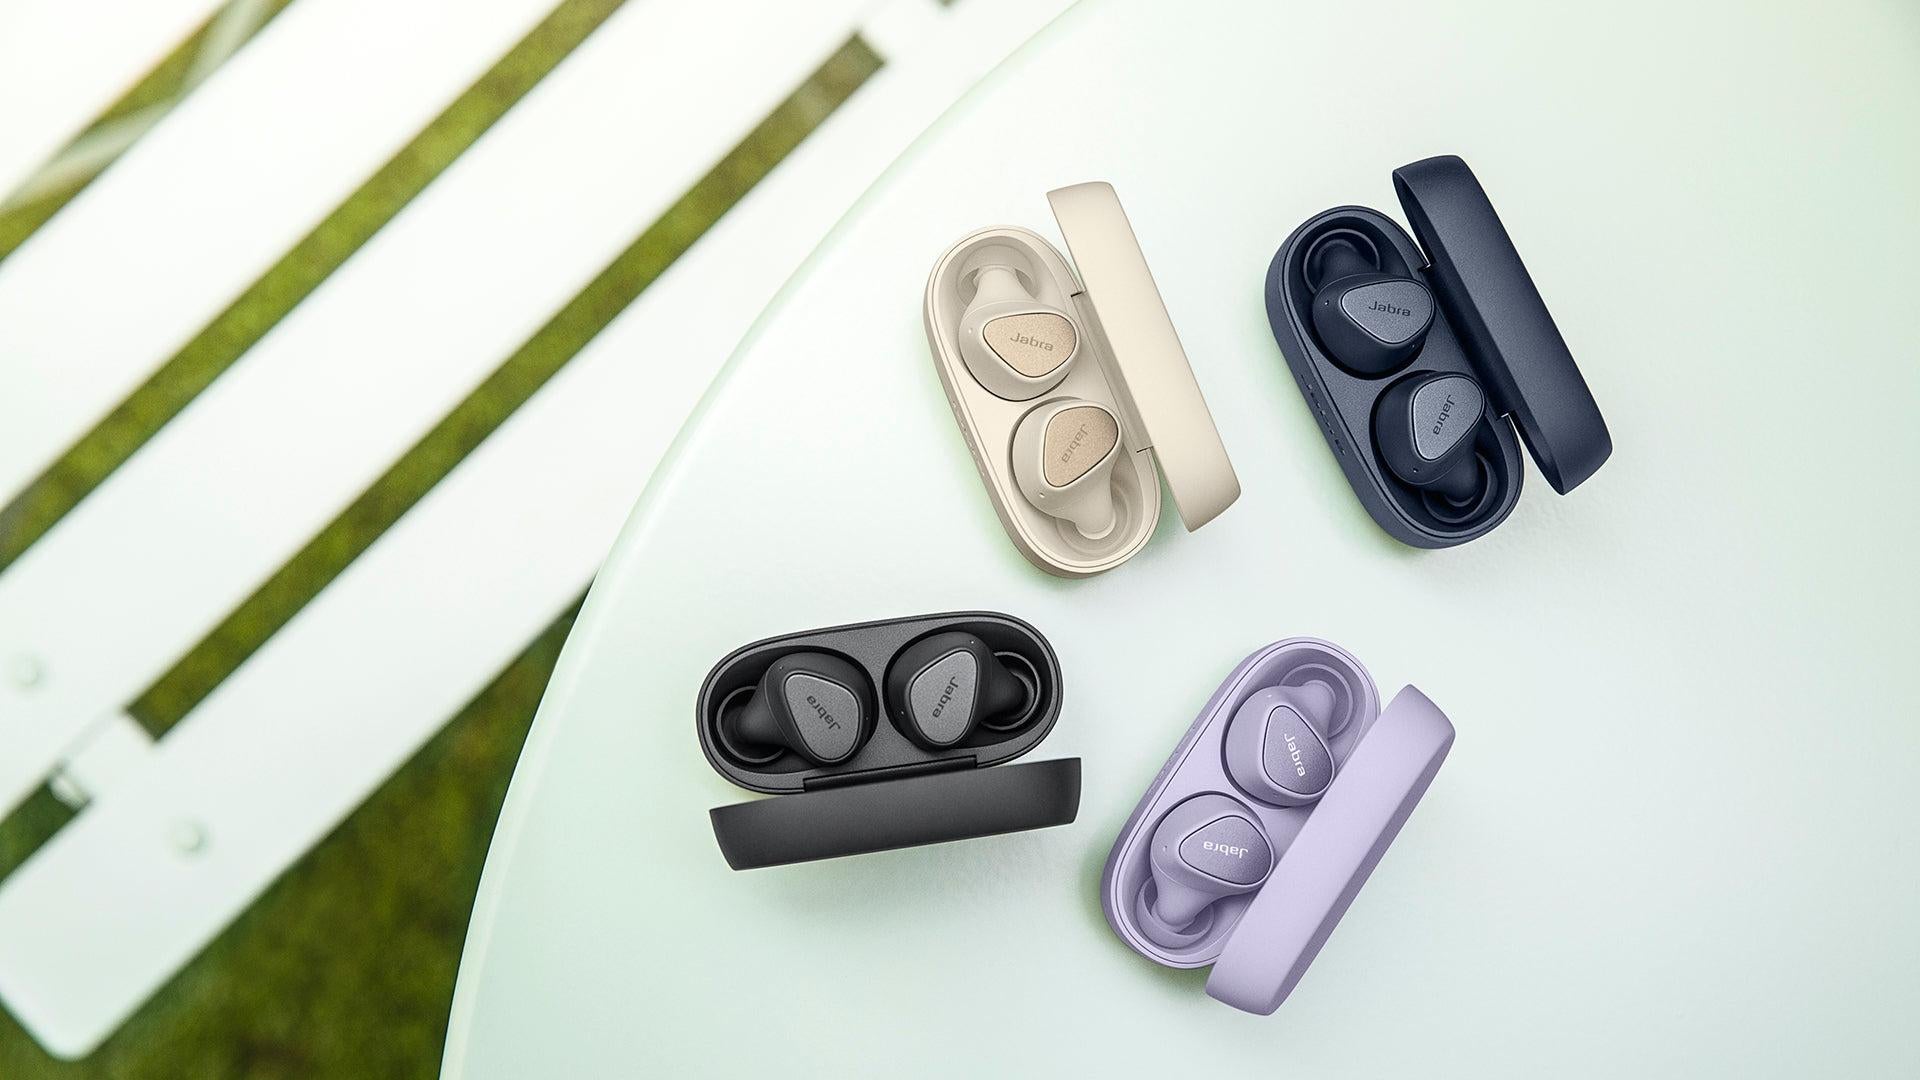 Jabra's new $US79 ($108) Elite 3 earbuds don't offer ANC, but they're still compelling for the price. (Photo: Jabra)